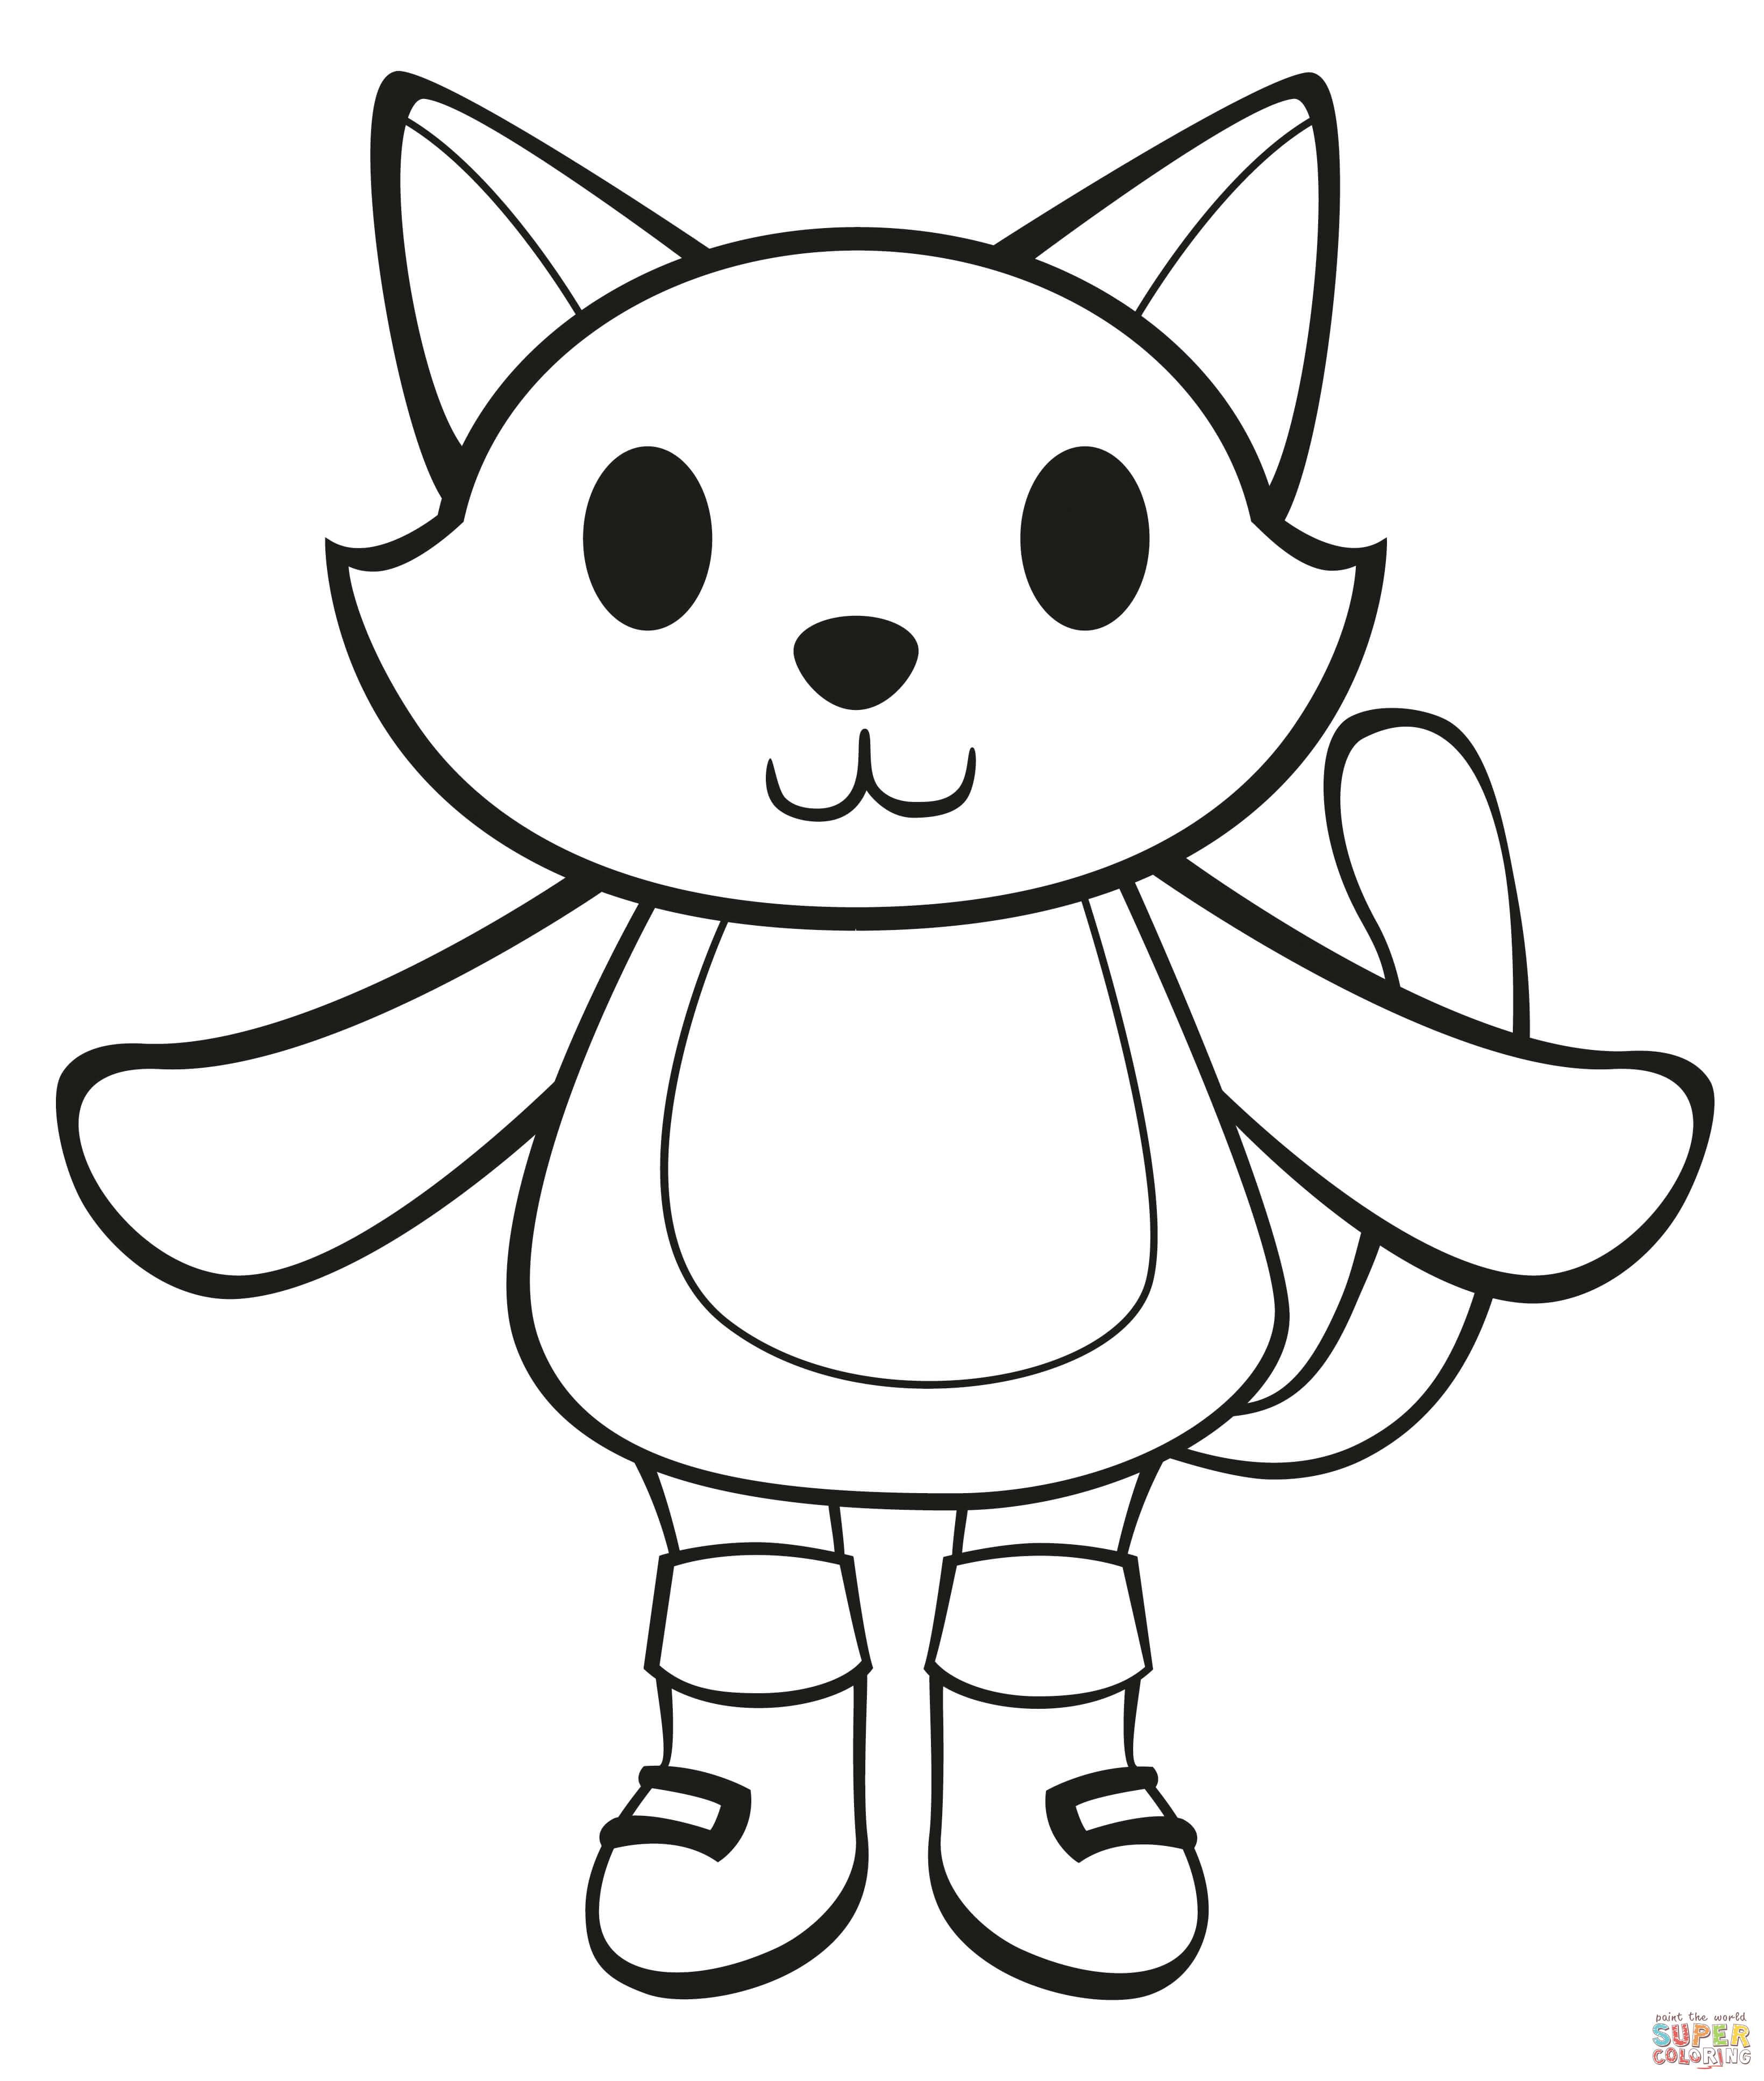 Kitty in boots coloring page free printable coloring pages